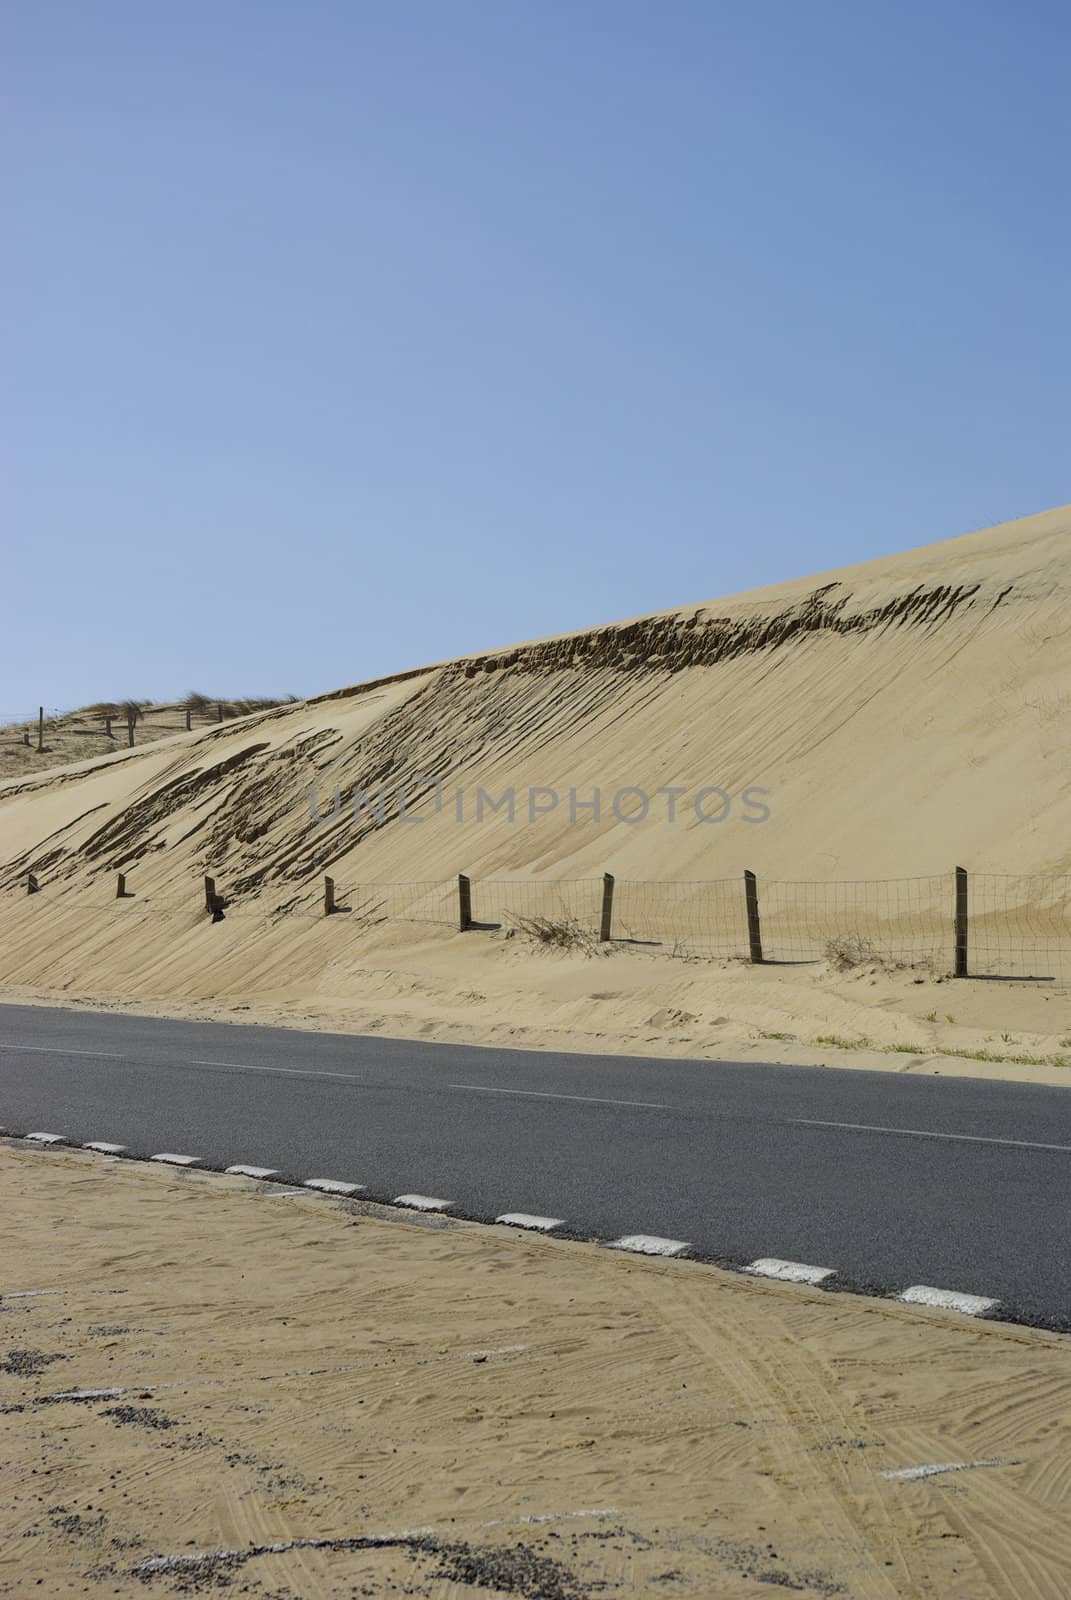 An isolated road along big dunes with a little barrier and some stranding in the sand